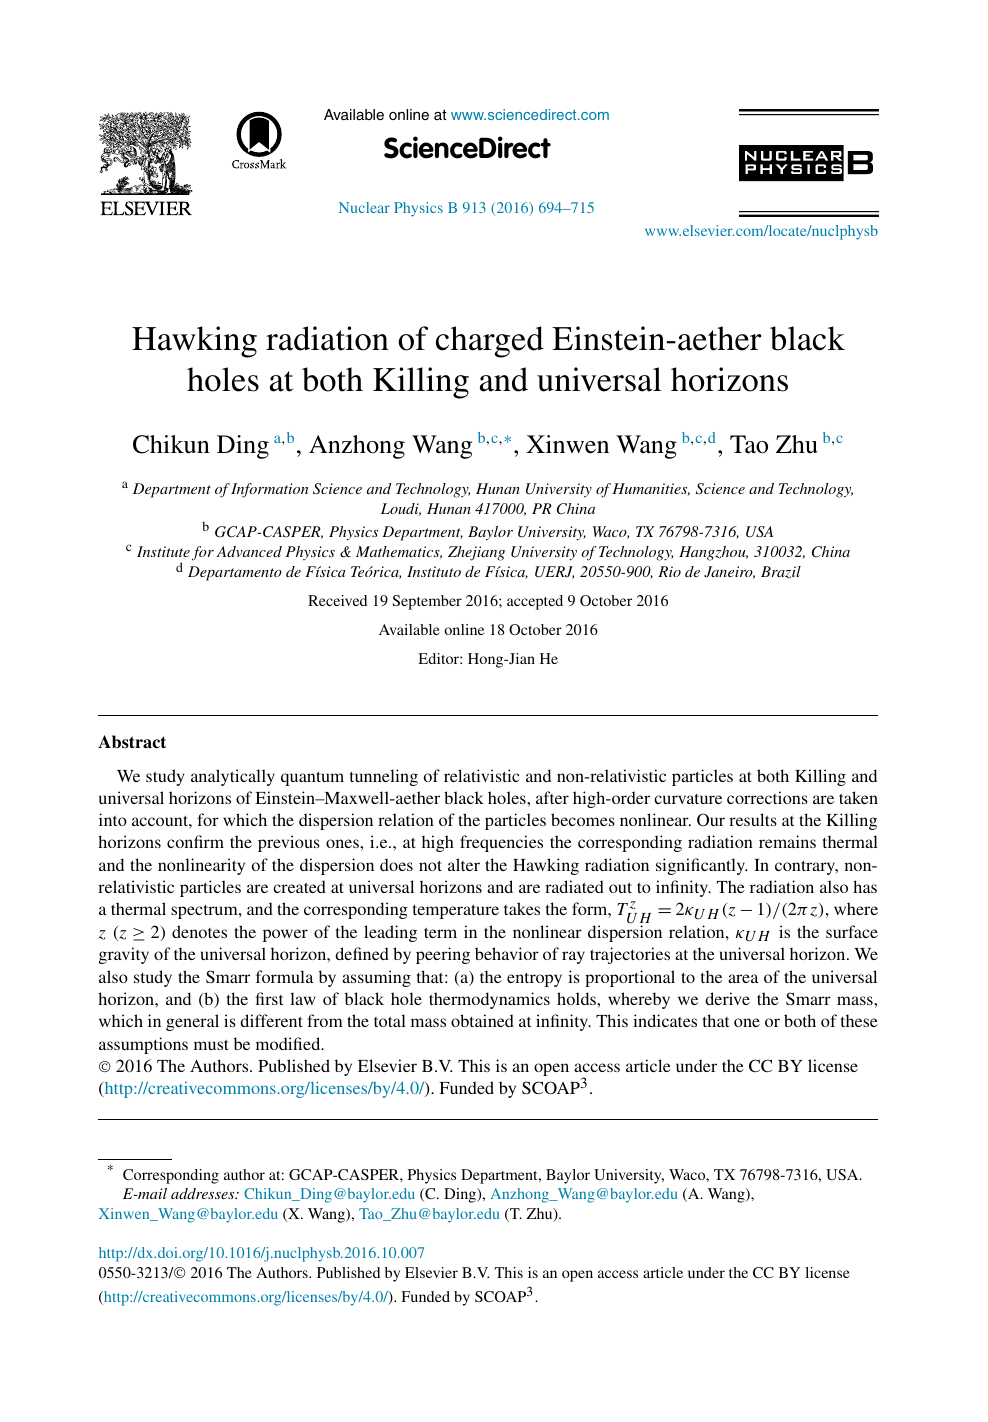 Hawking Radiation Of Charged Einstein Aether Black Holes At Both Killing And Universal Horizons Topic Of Research Paper In Physical Sciences Download Scholarly Article Pdf And Read For Free On Cyberleninka Open